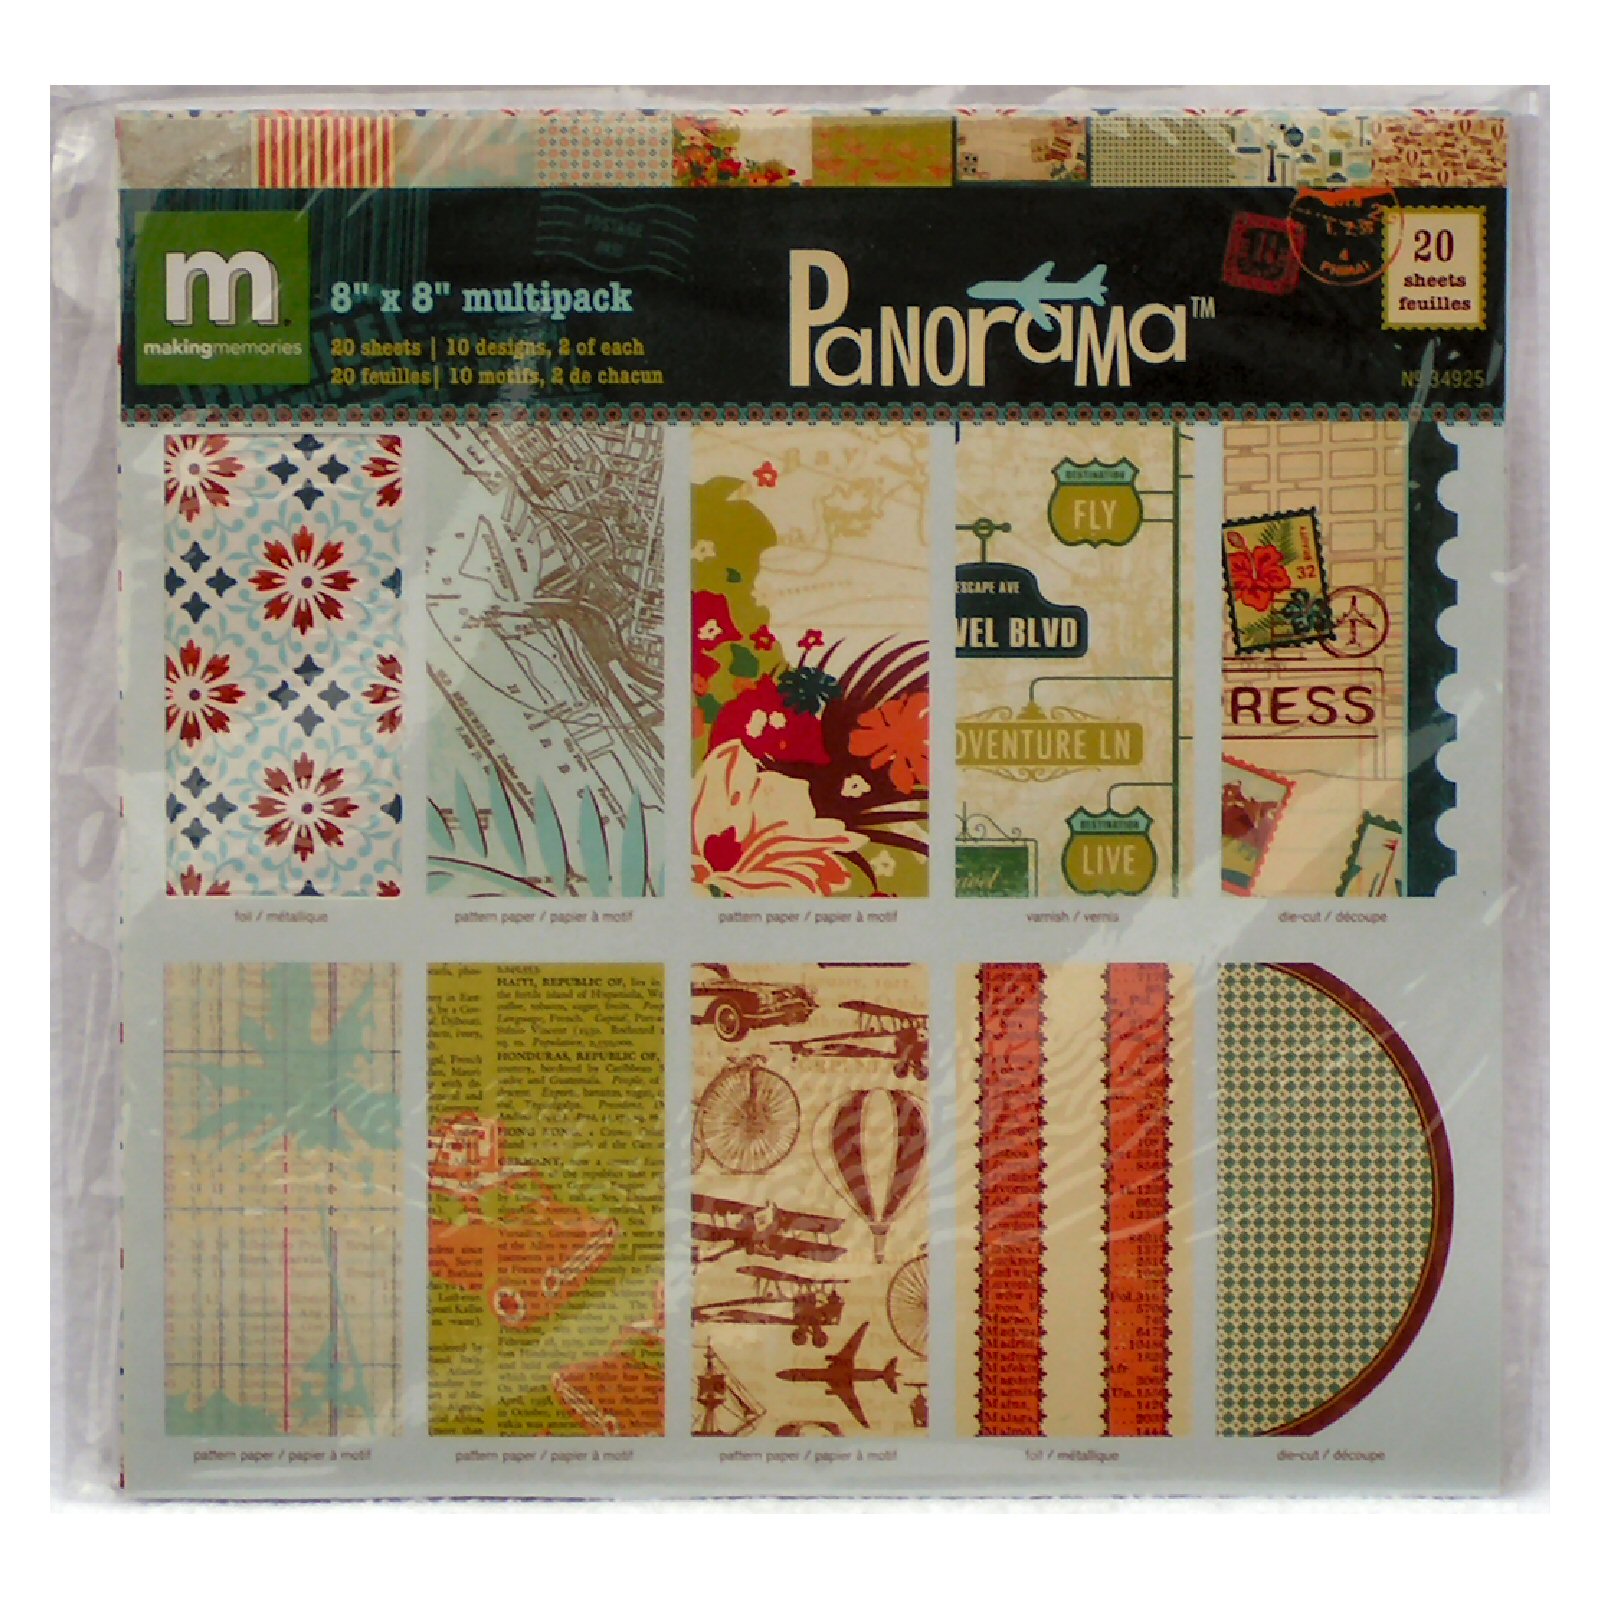 8 x 8 inch Multipack PANORAMA Specialty Paper